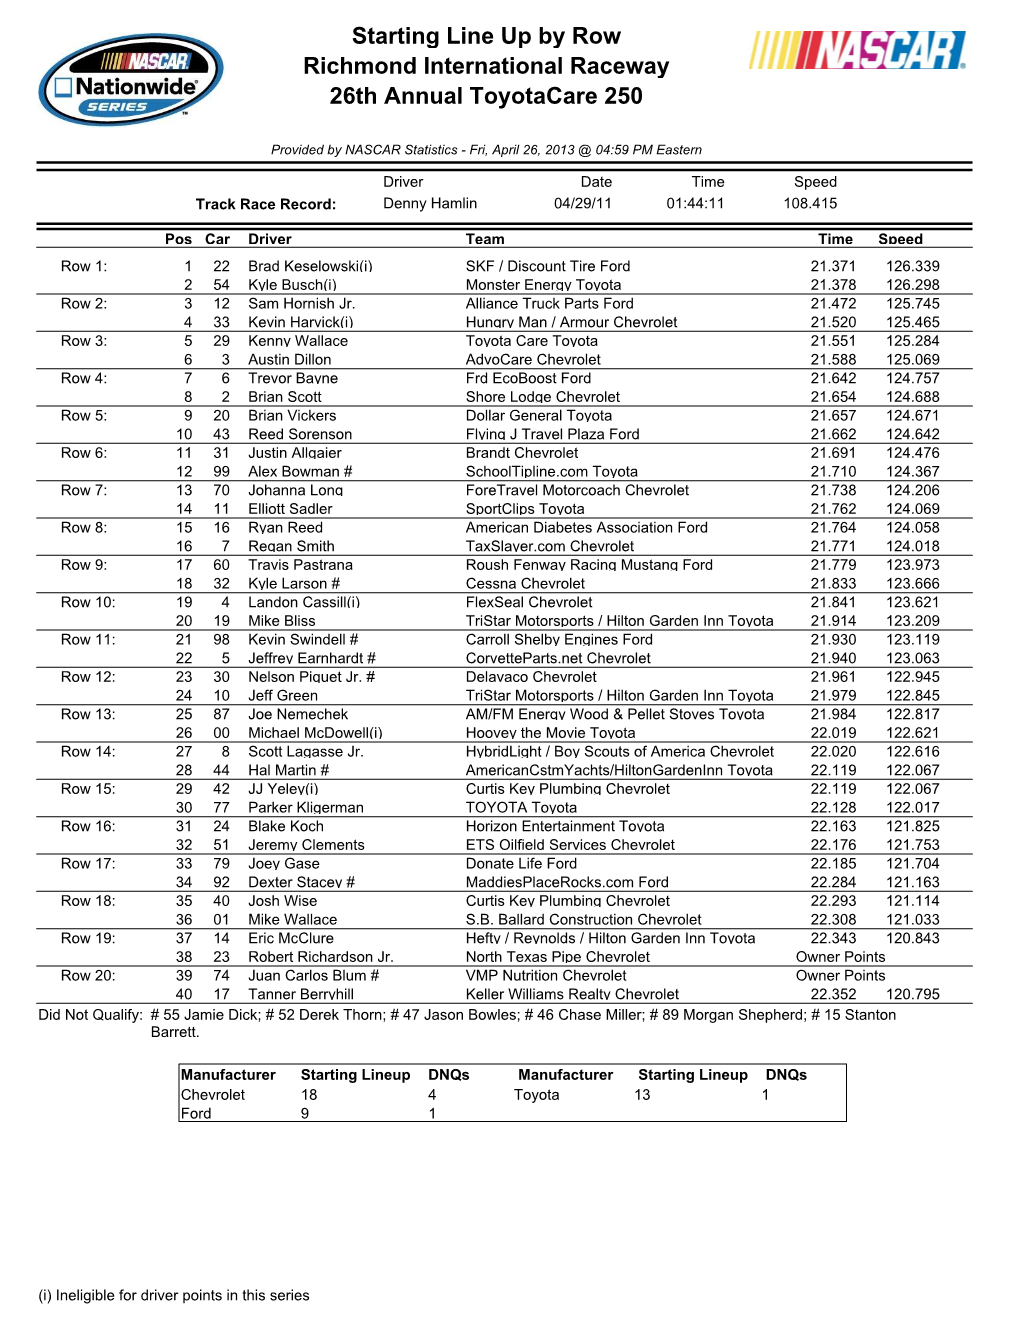 Starting Line up by Row Richmond International Raceway 26Th Annual Toyotacare 250